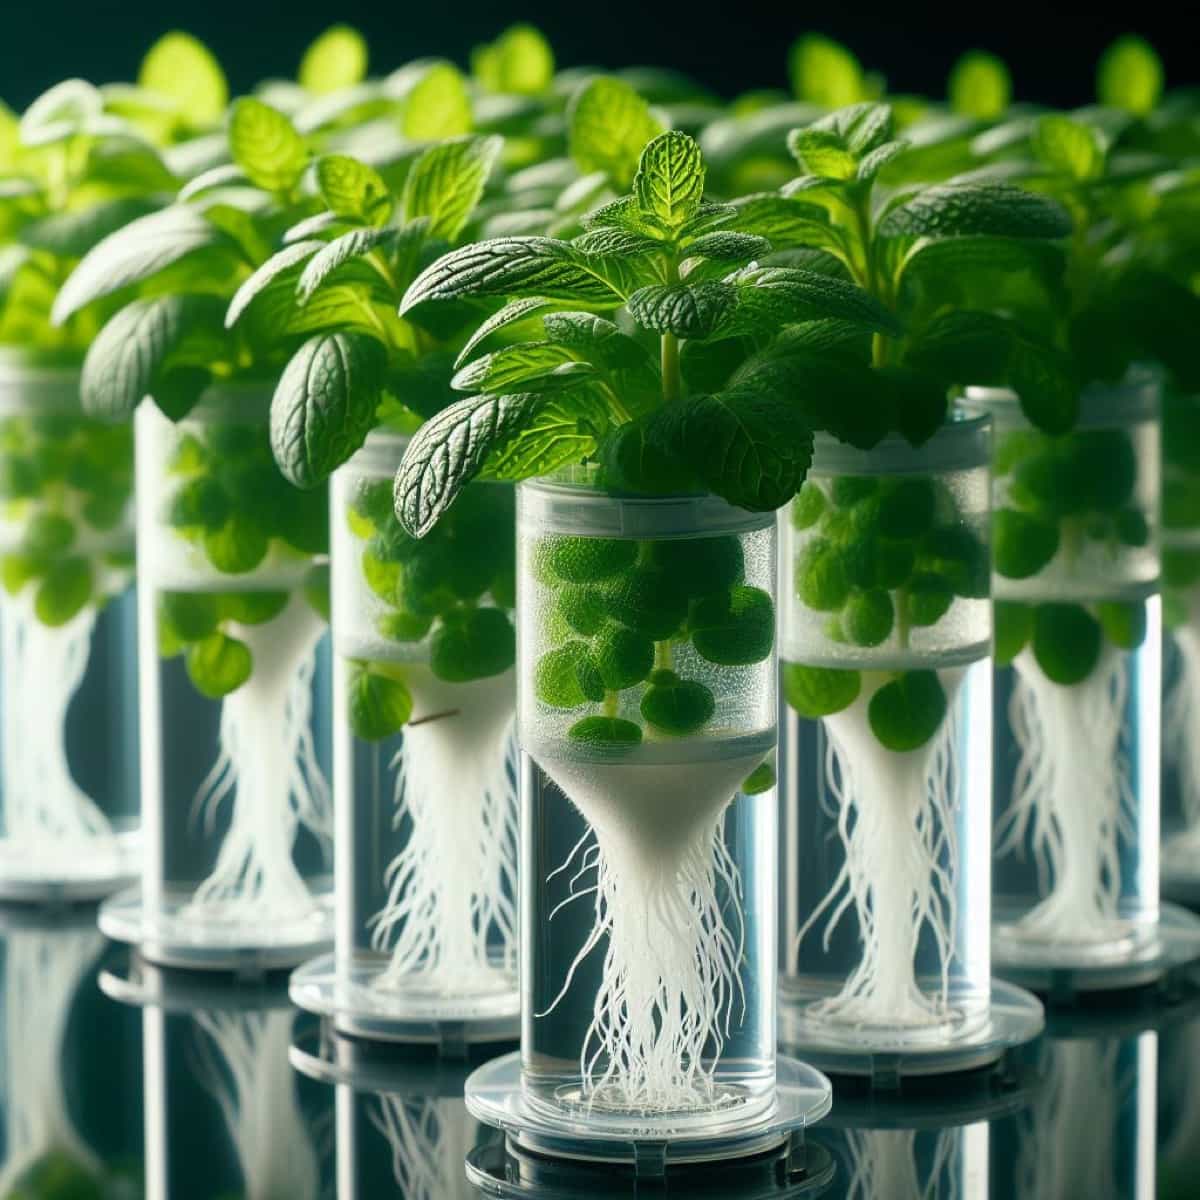 How to Grow Mint on Aeroponic Towers